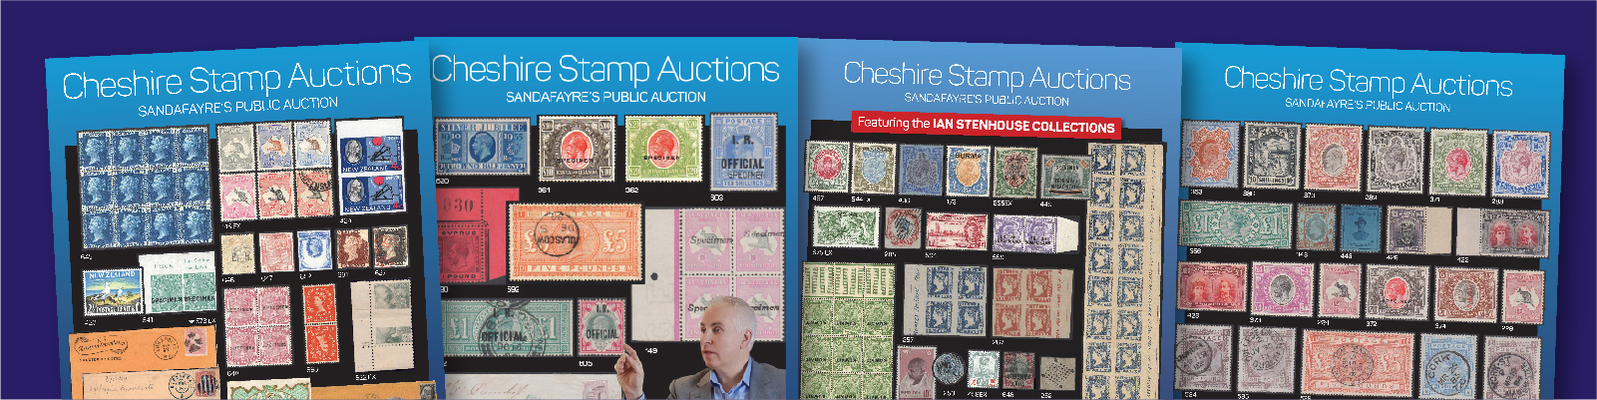 Sandafayre Catalogue and Cheshire Stamp Auctions posters